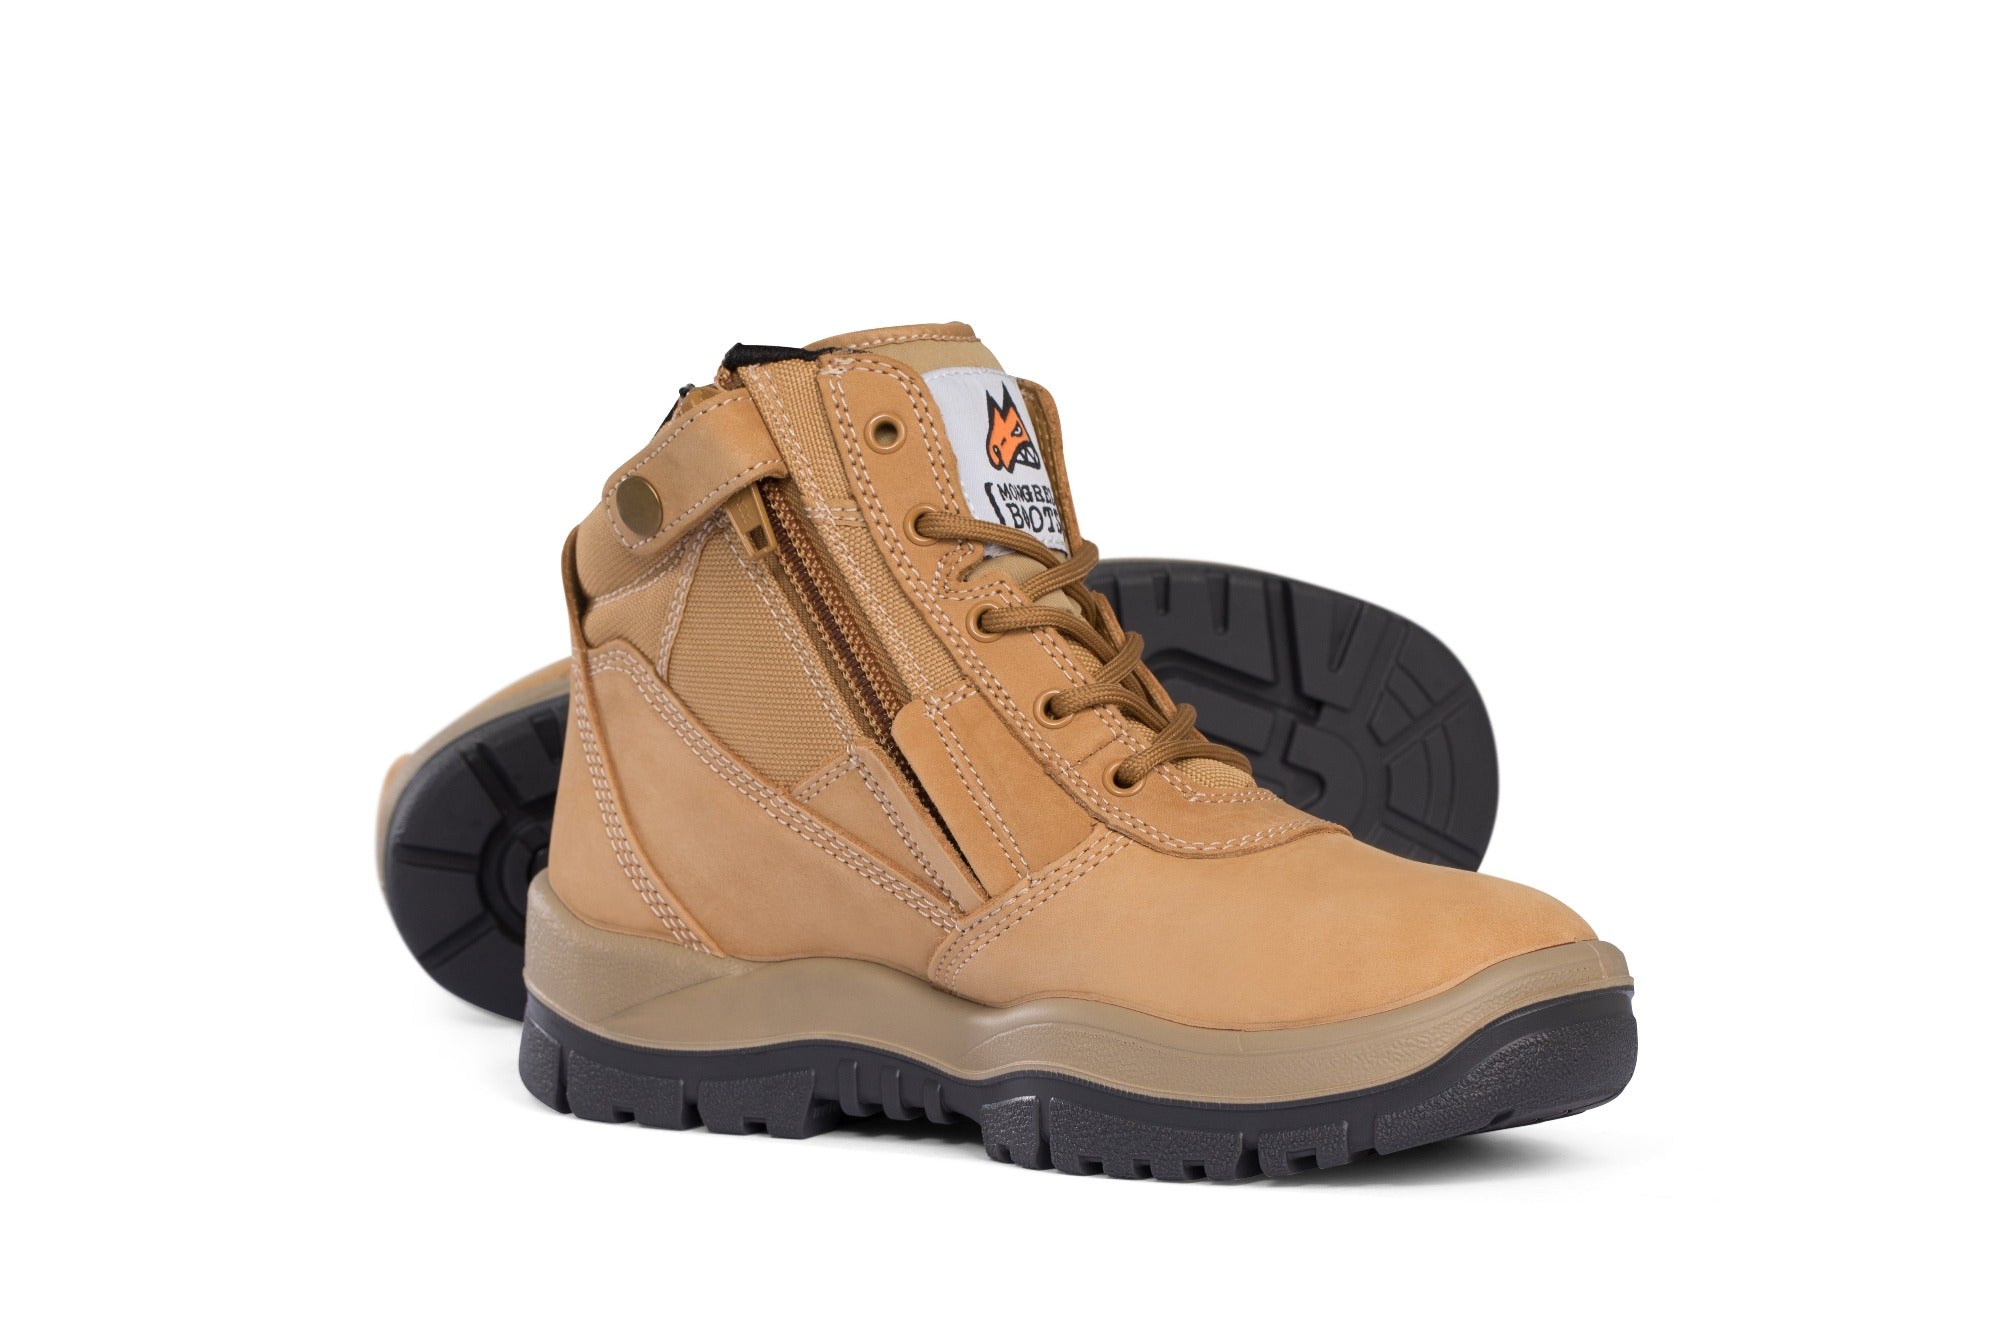 Mongrel Non-Safety Zipsider Boot - Wheat 961050